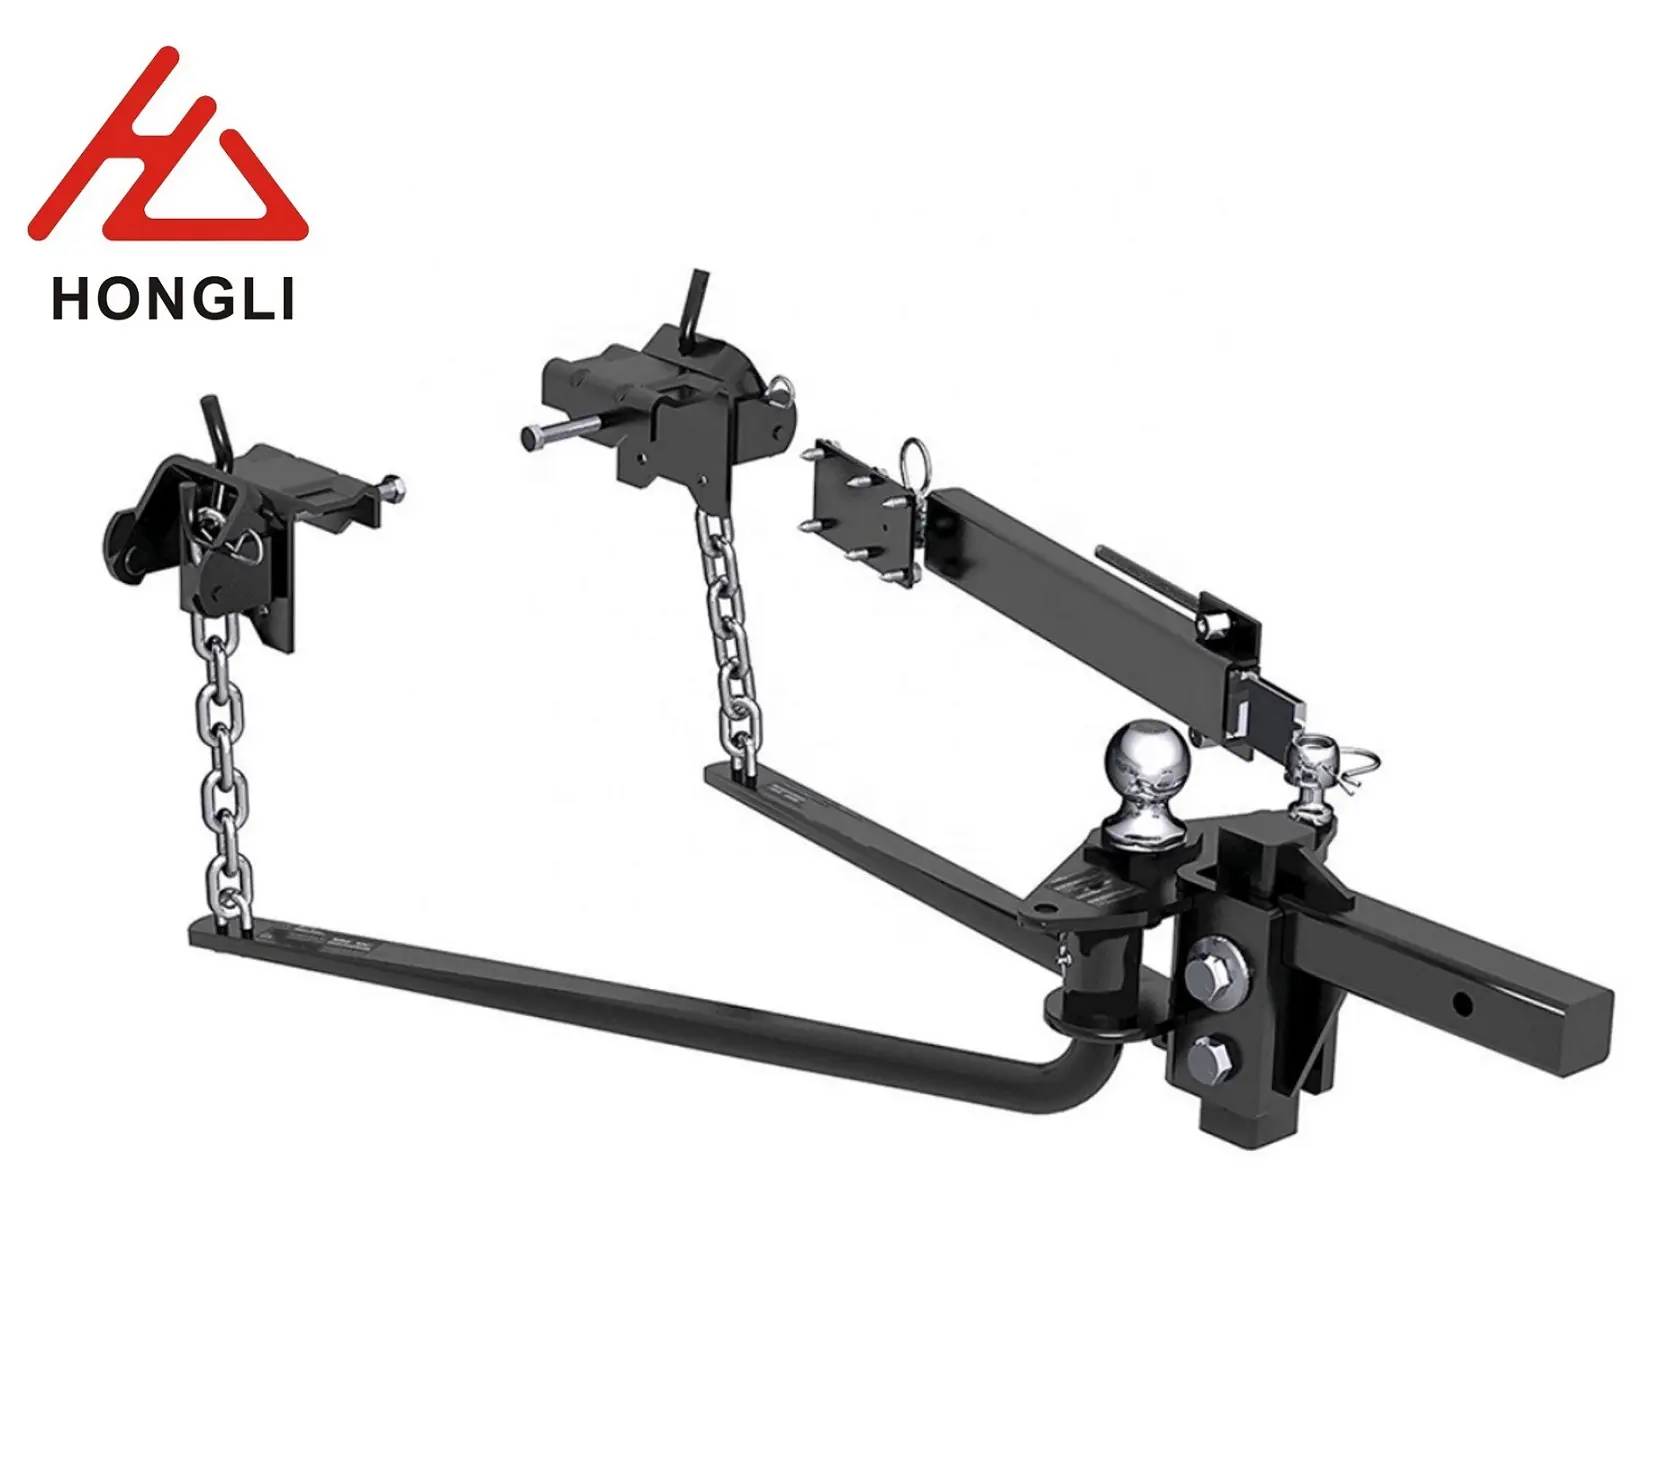 Hongli Round Bar Weight Distribution Hitch with Sway Control Black 10 000 lbs 2-Inch Shank 2-5/16-Inch Ball